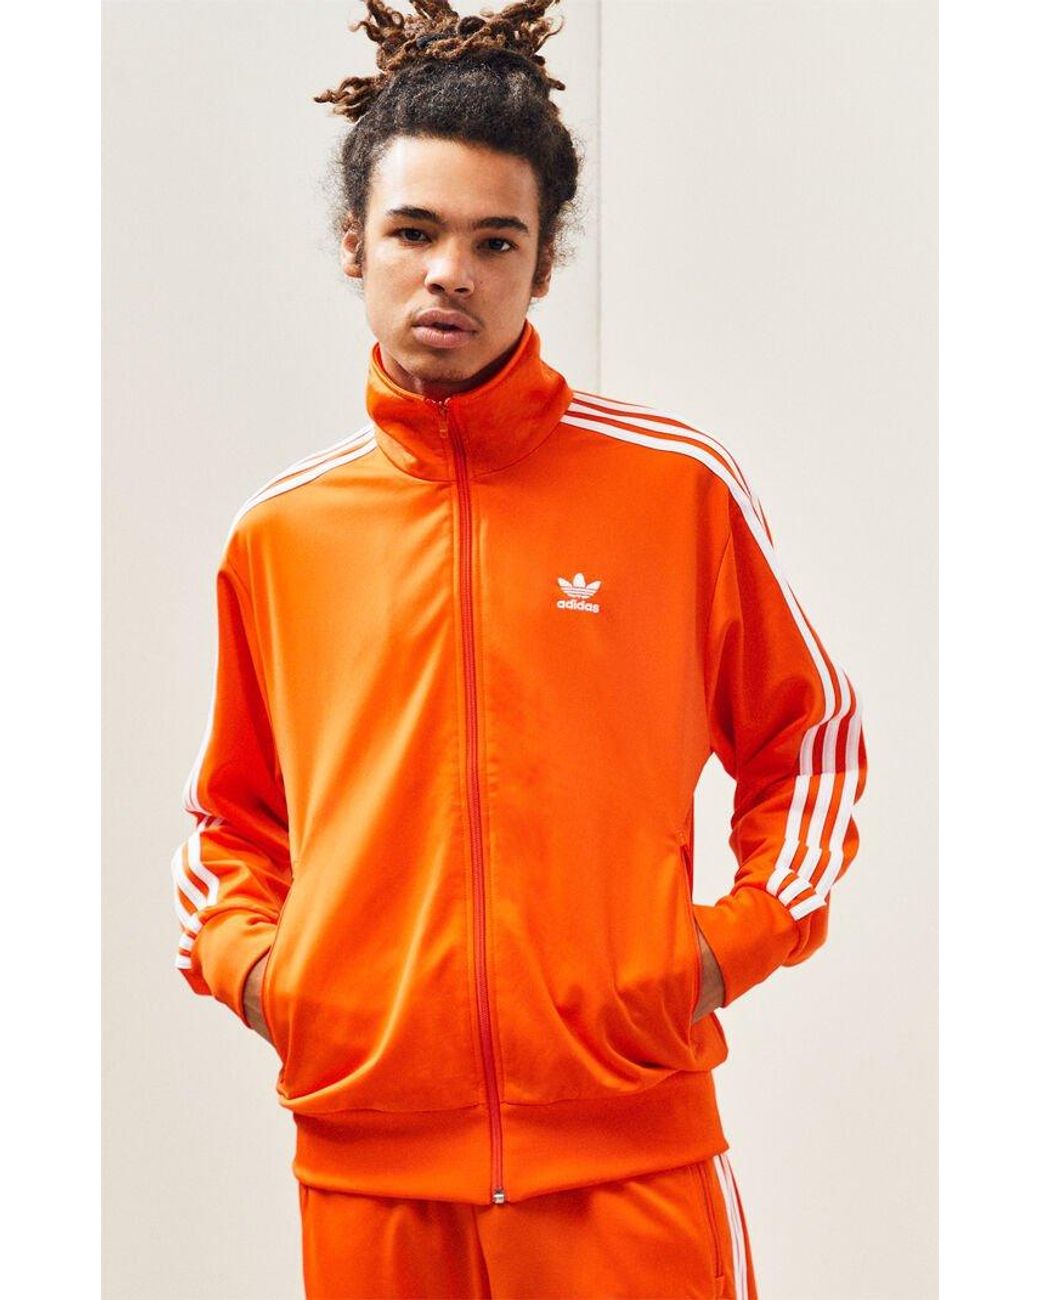 Orange Adidas Outfit | vlr.eng.br